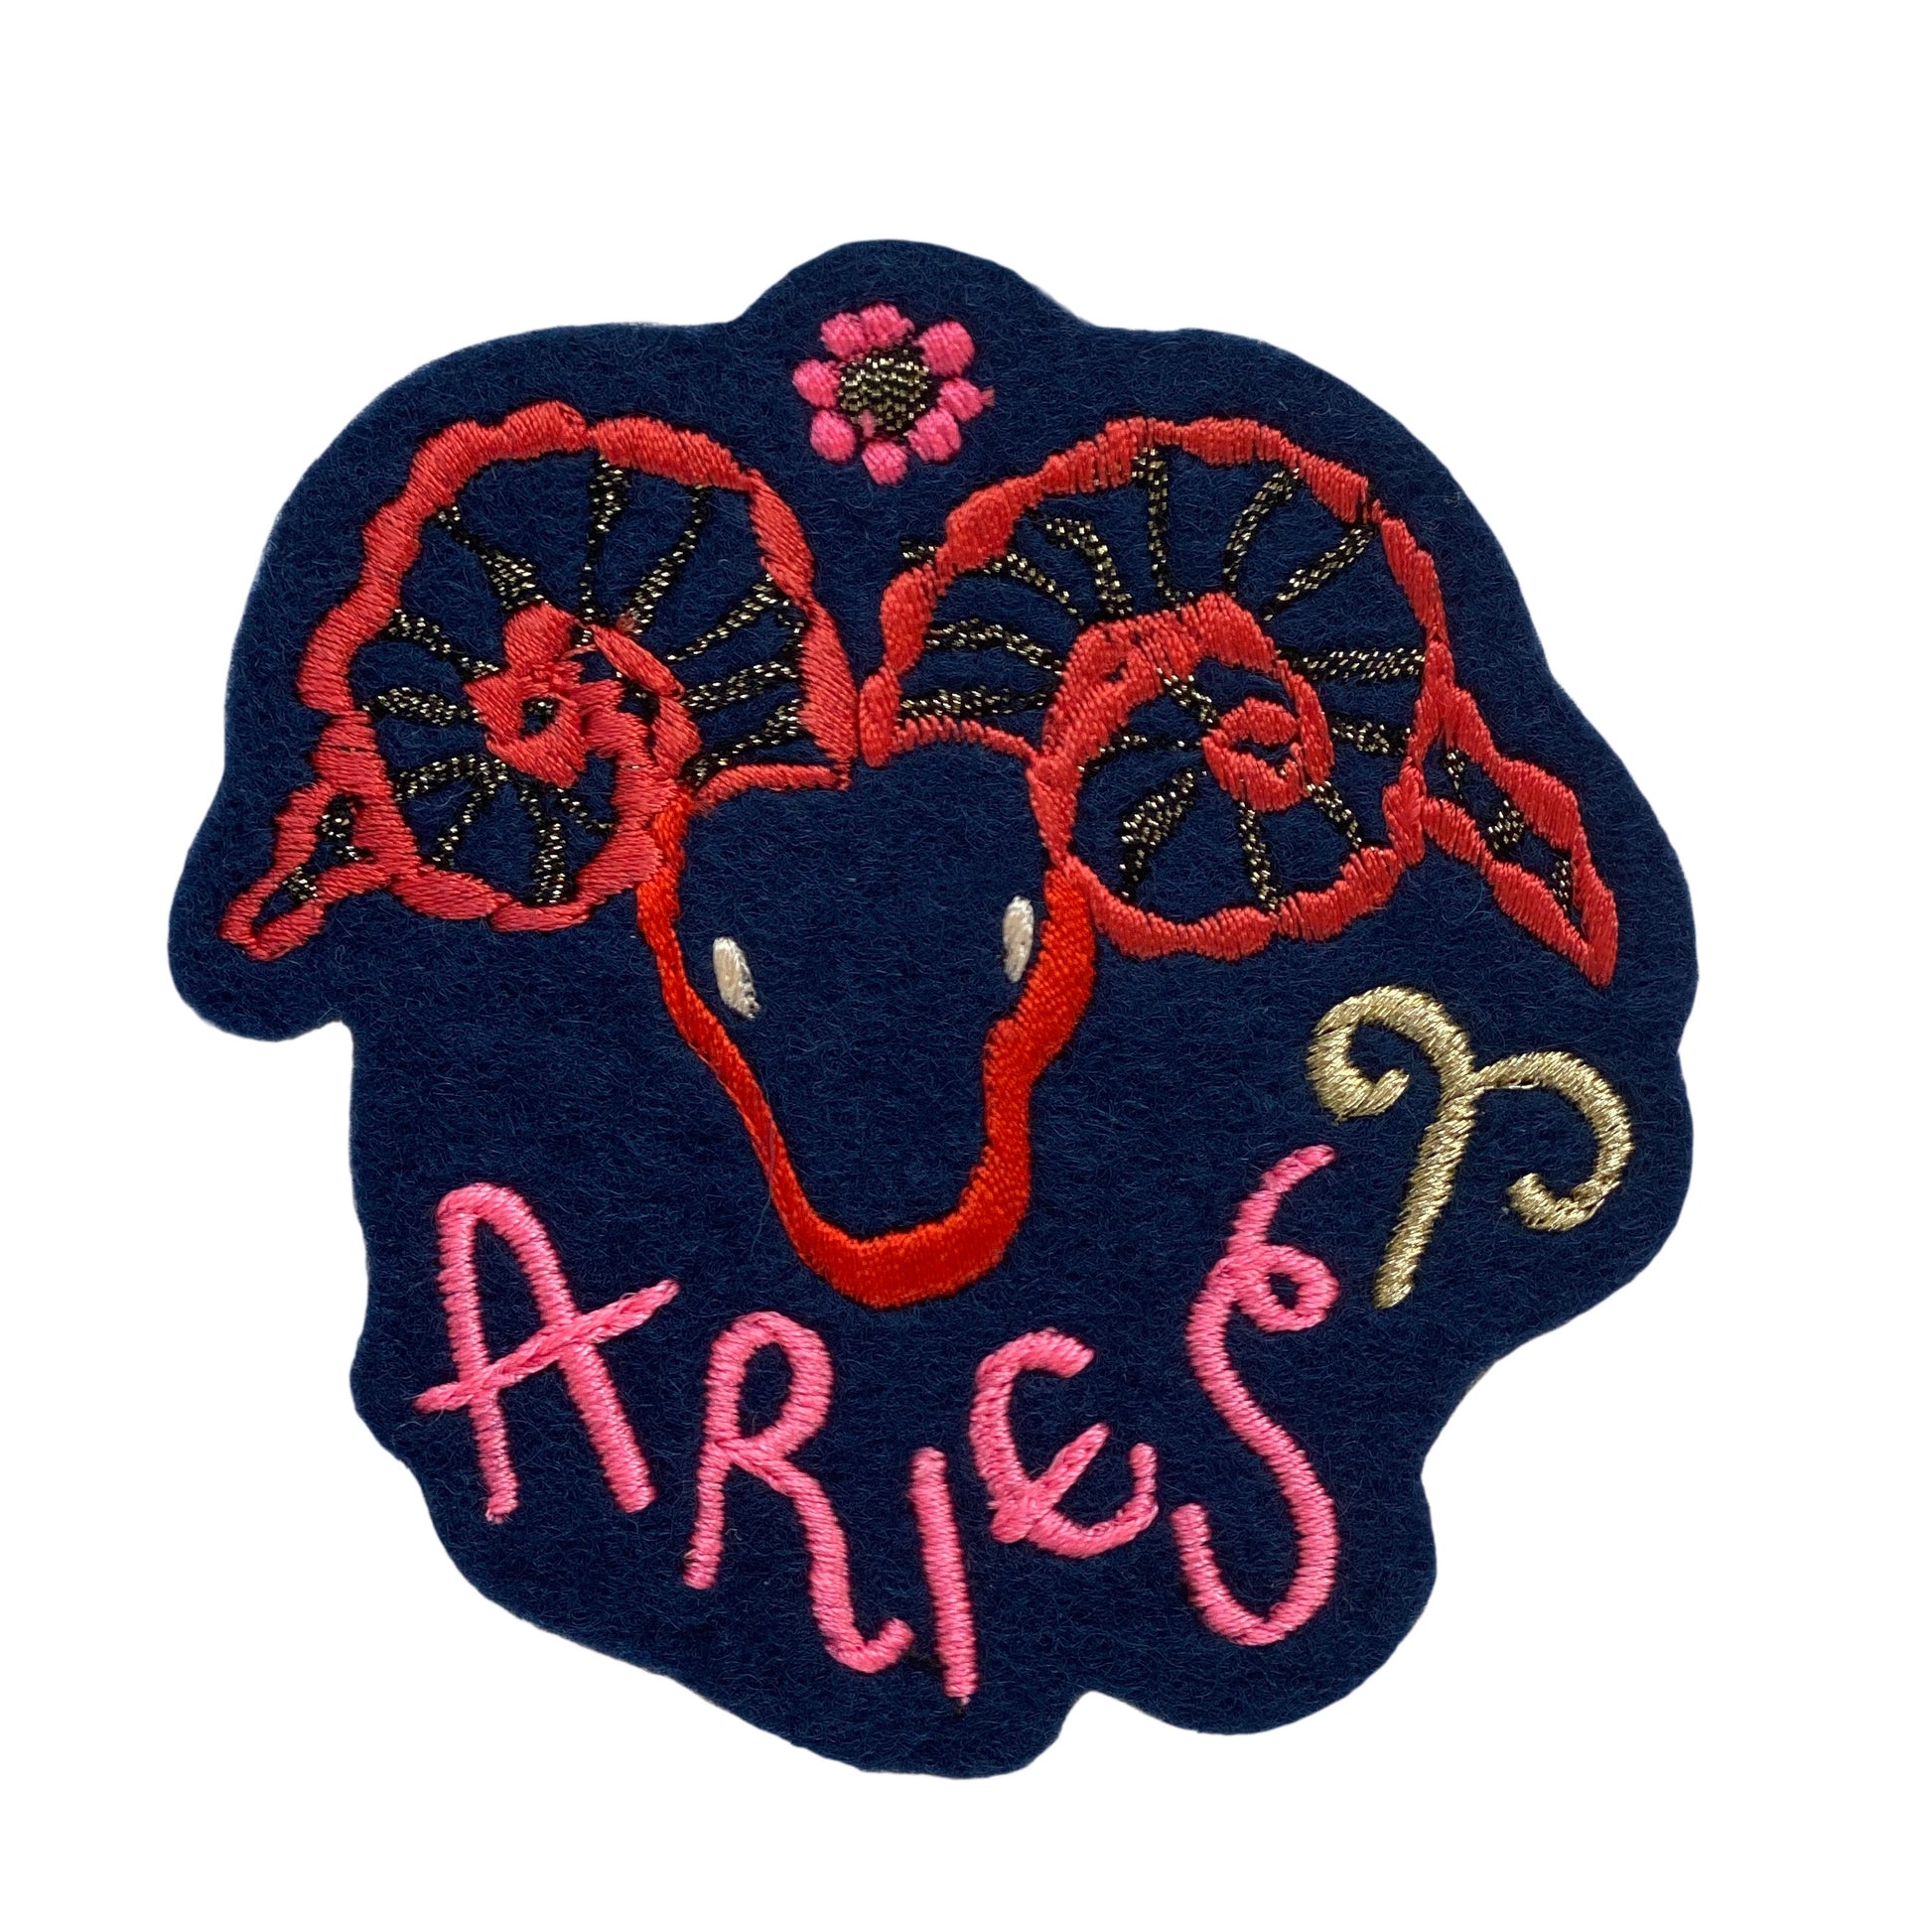 Aries embroidered patch on white background